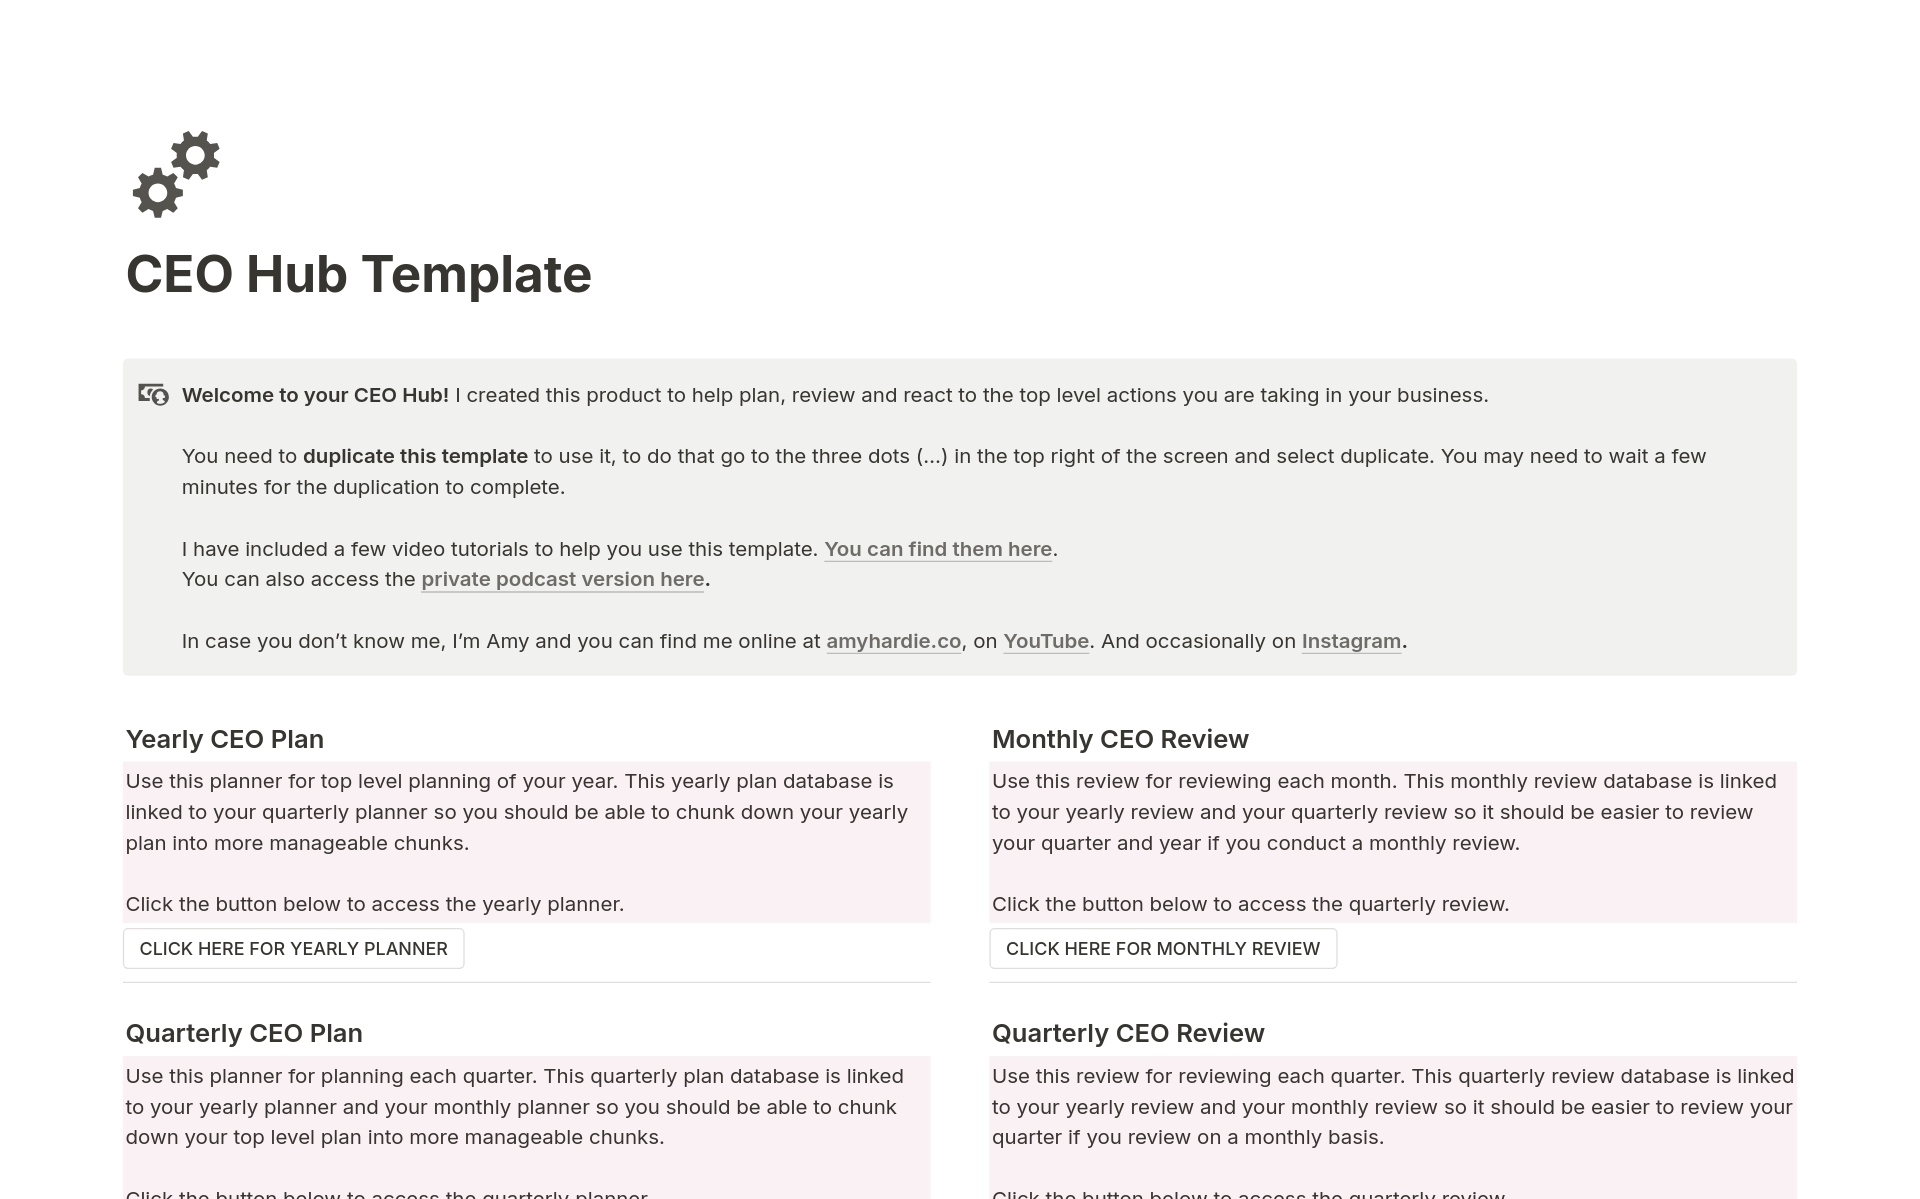 This Notion CEO Hub template will help you: 

1: Review if you are actually taking the actions that you say you are going to take
2: Review if those actions are working and worth continuing with
3: Review your products and offers to see what is resonating with your customers